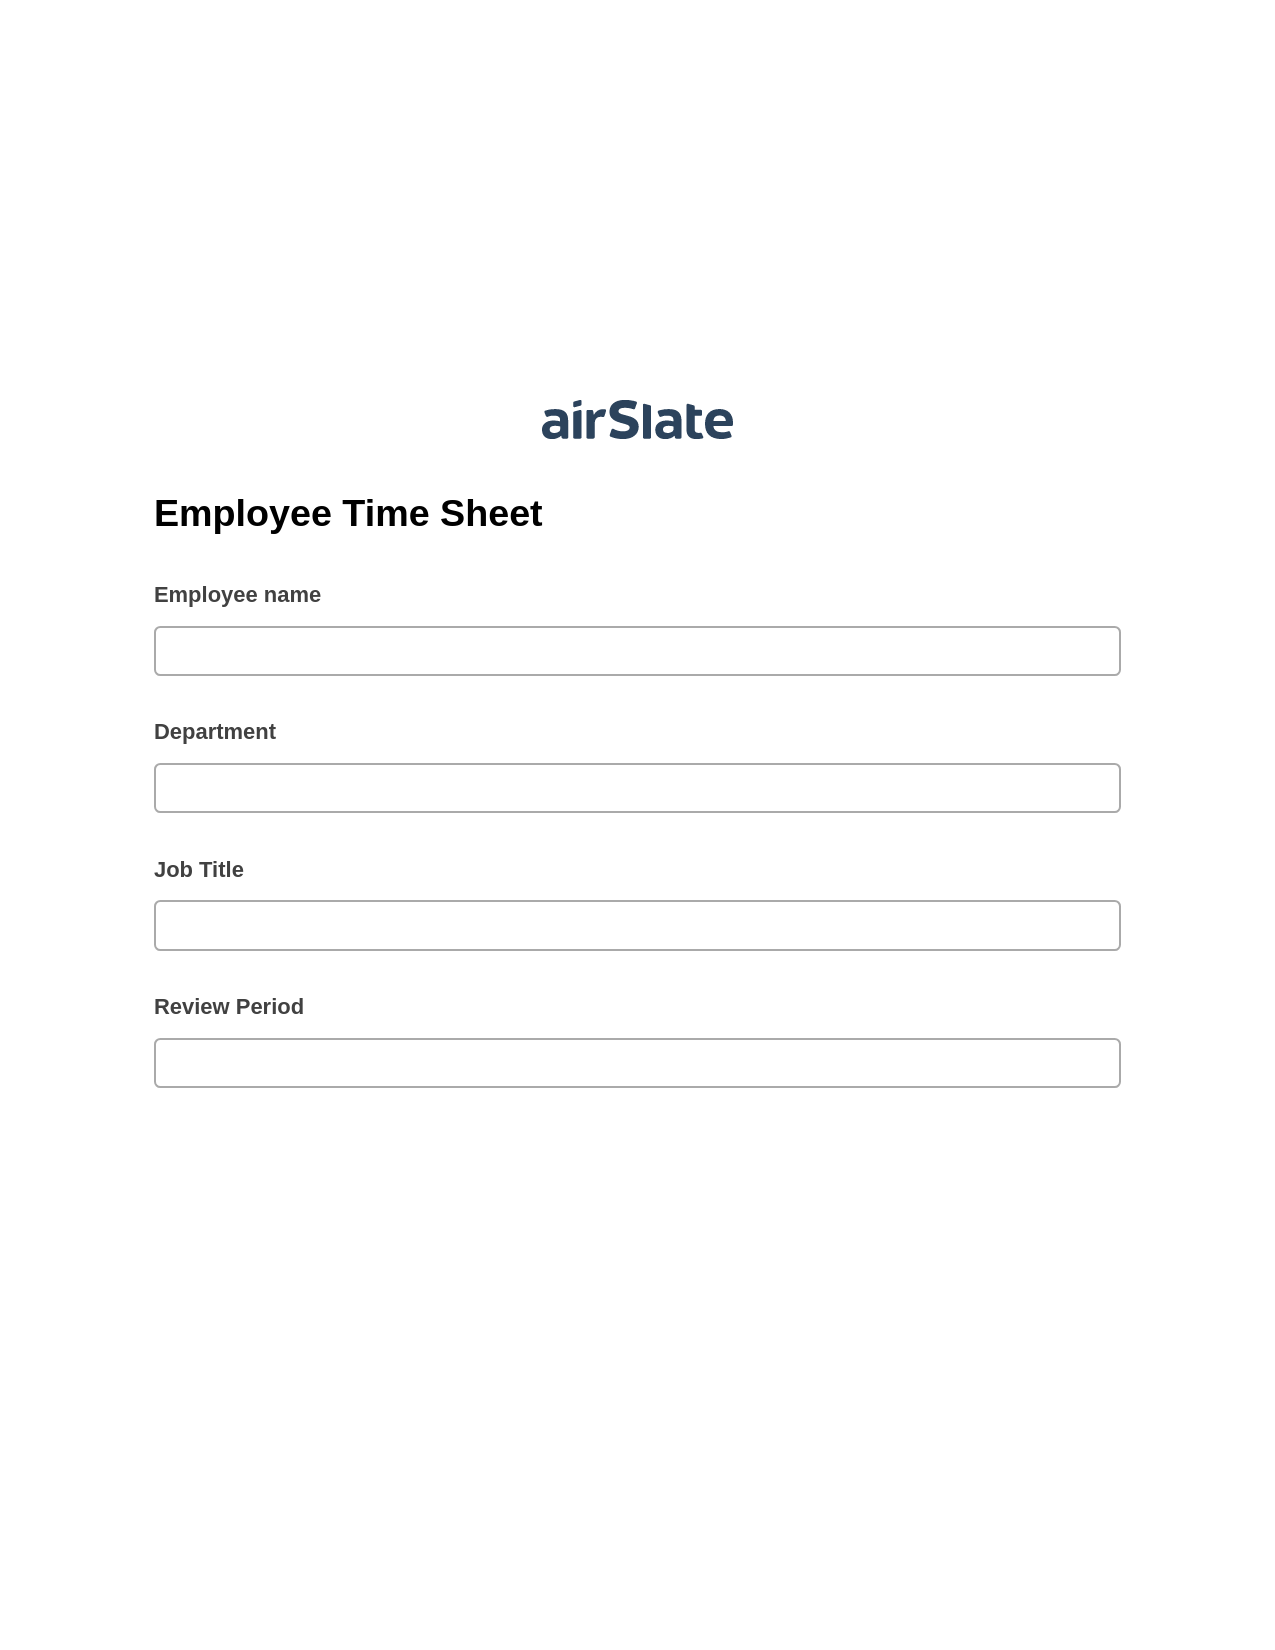 Employee Time Sheet Pre-fill Dropdowns from Smartsheet Bot, Remove Slate Bot, Post-finish Document Bot